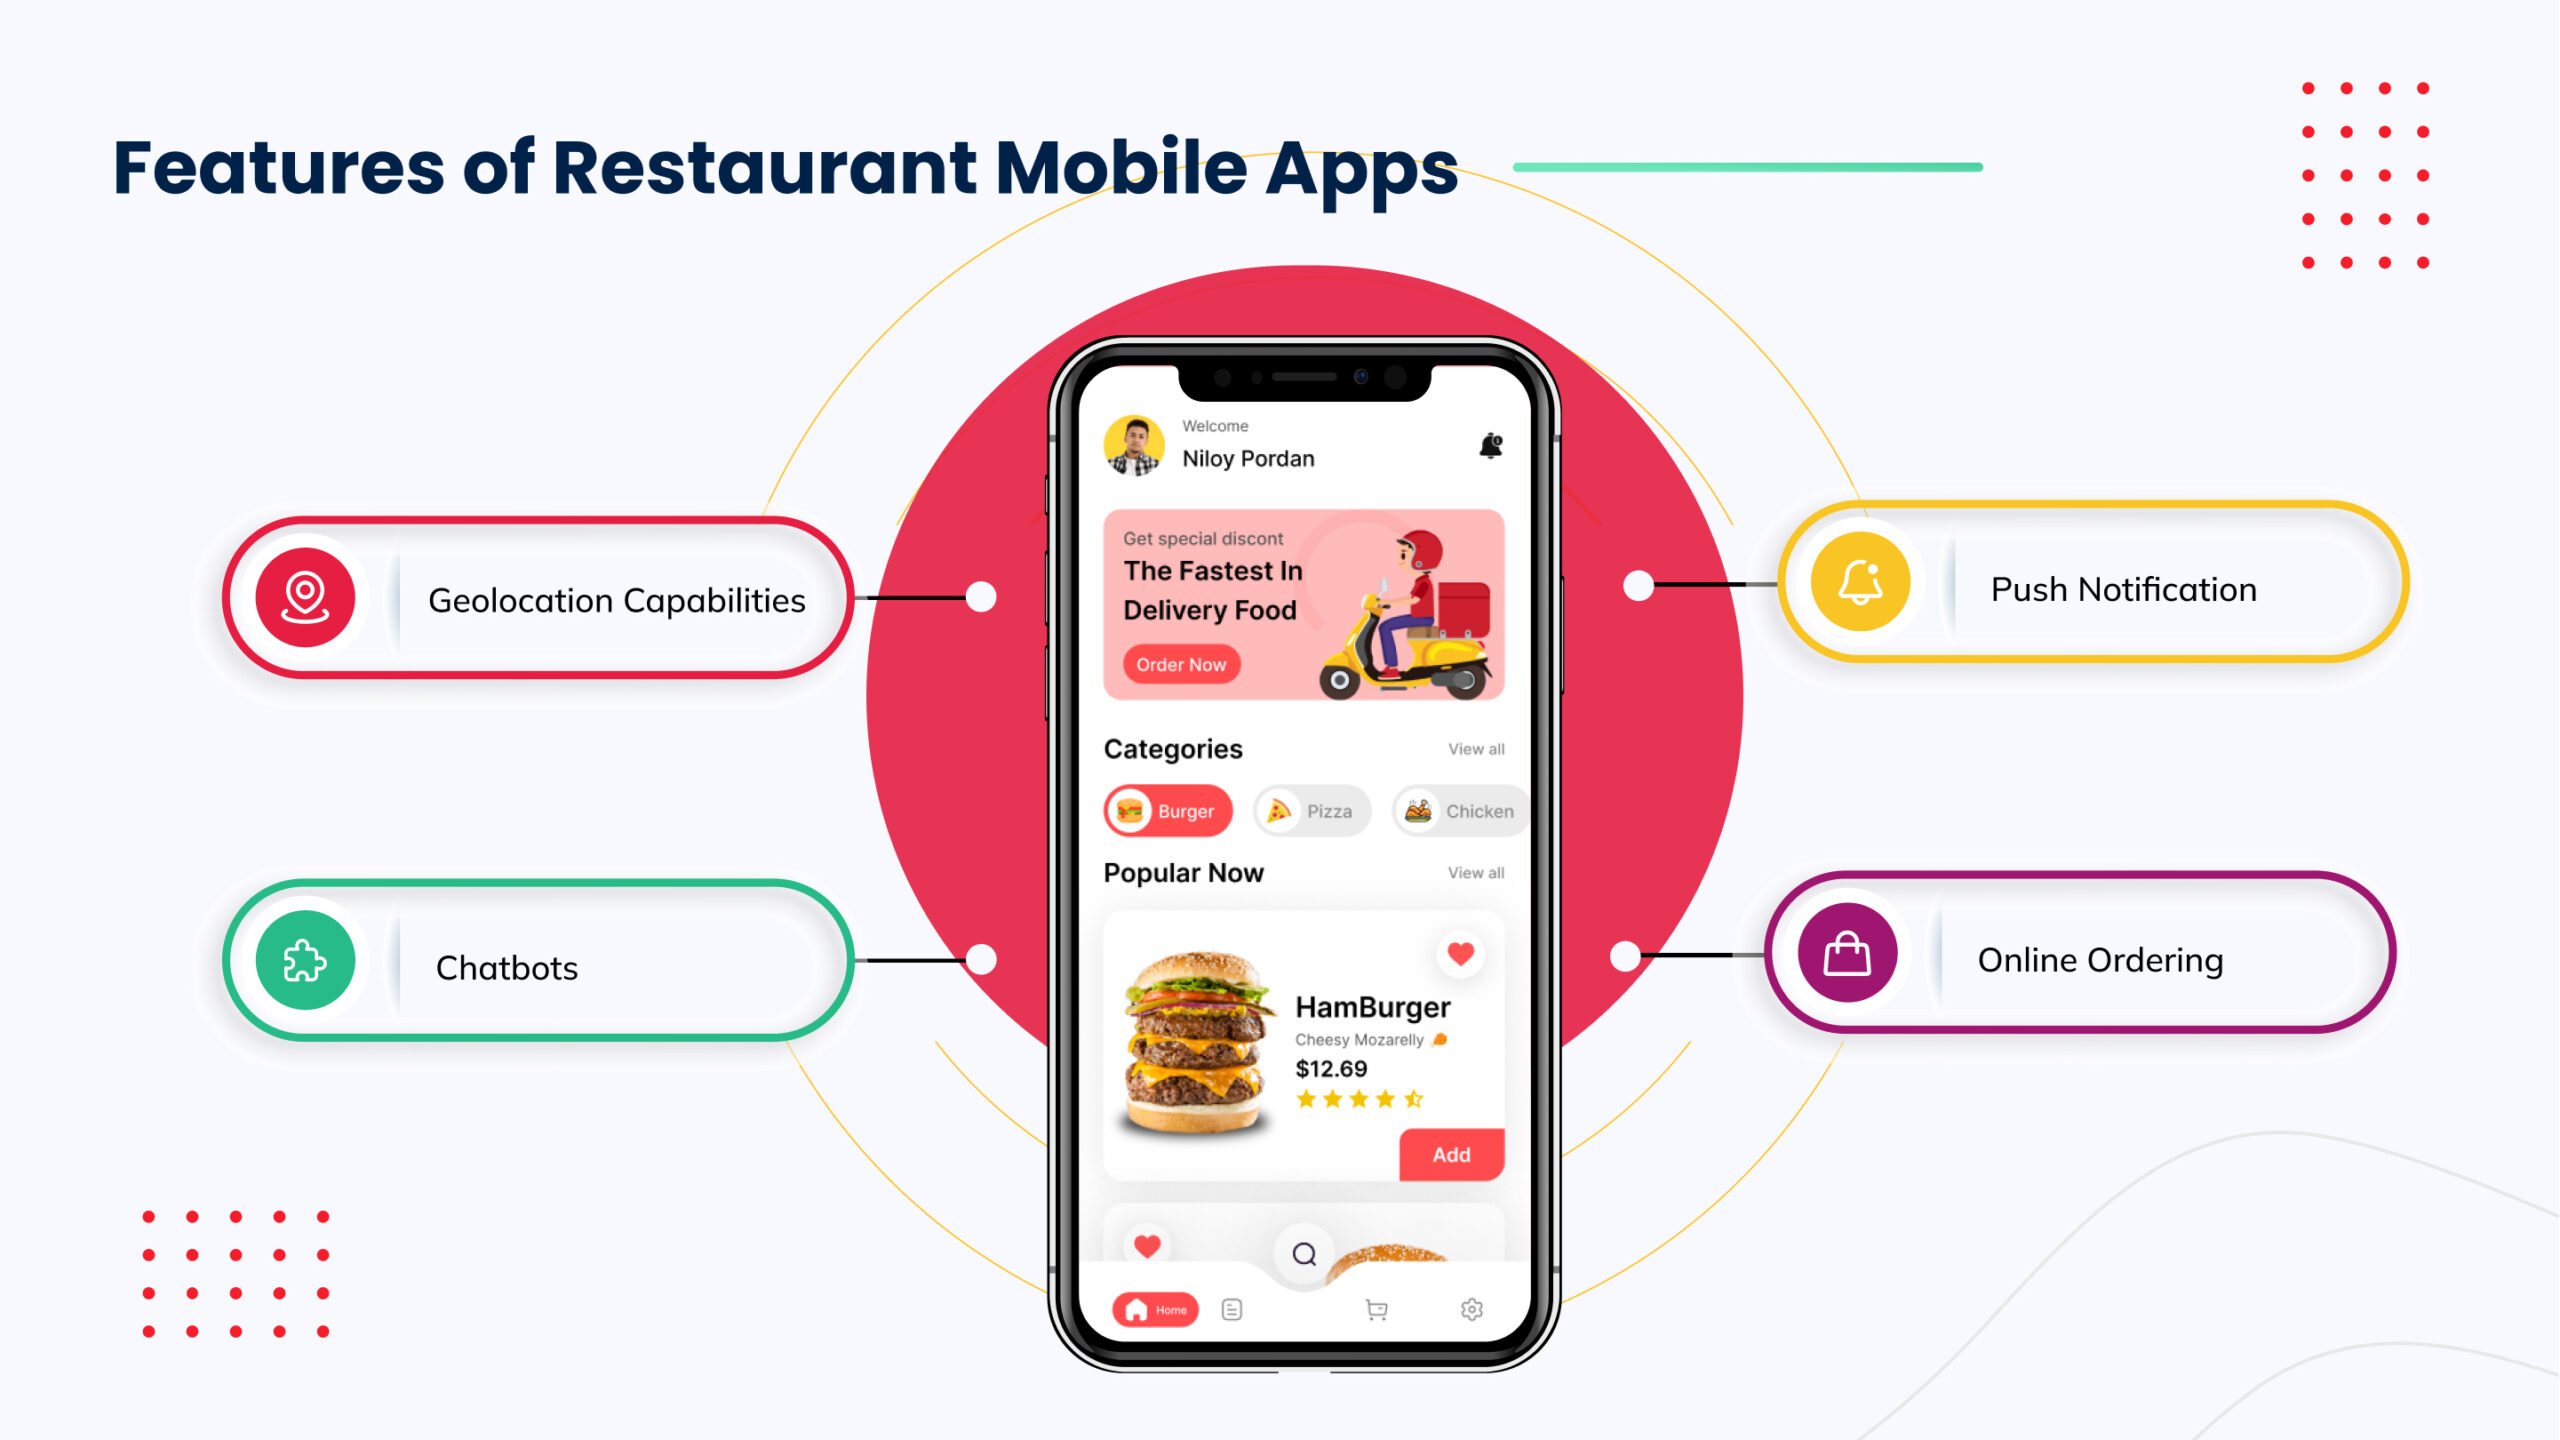 Features of a Restaurant App